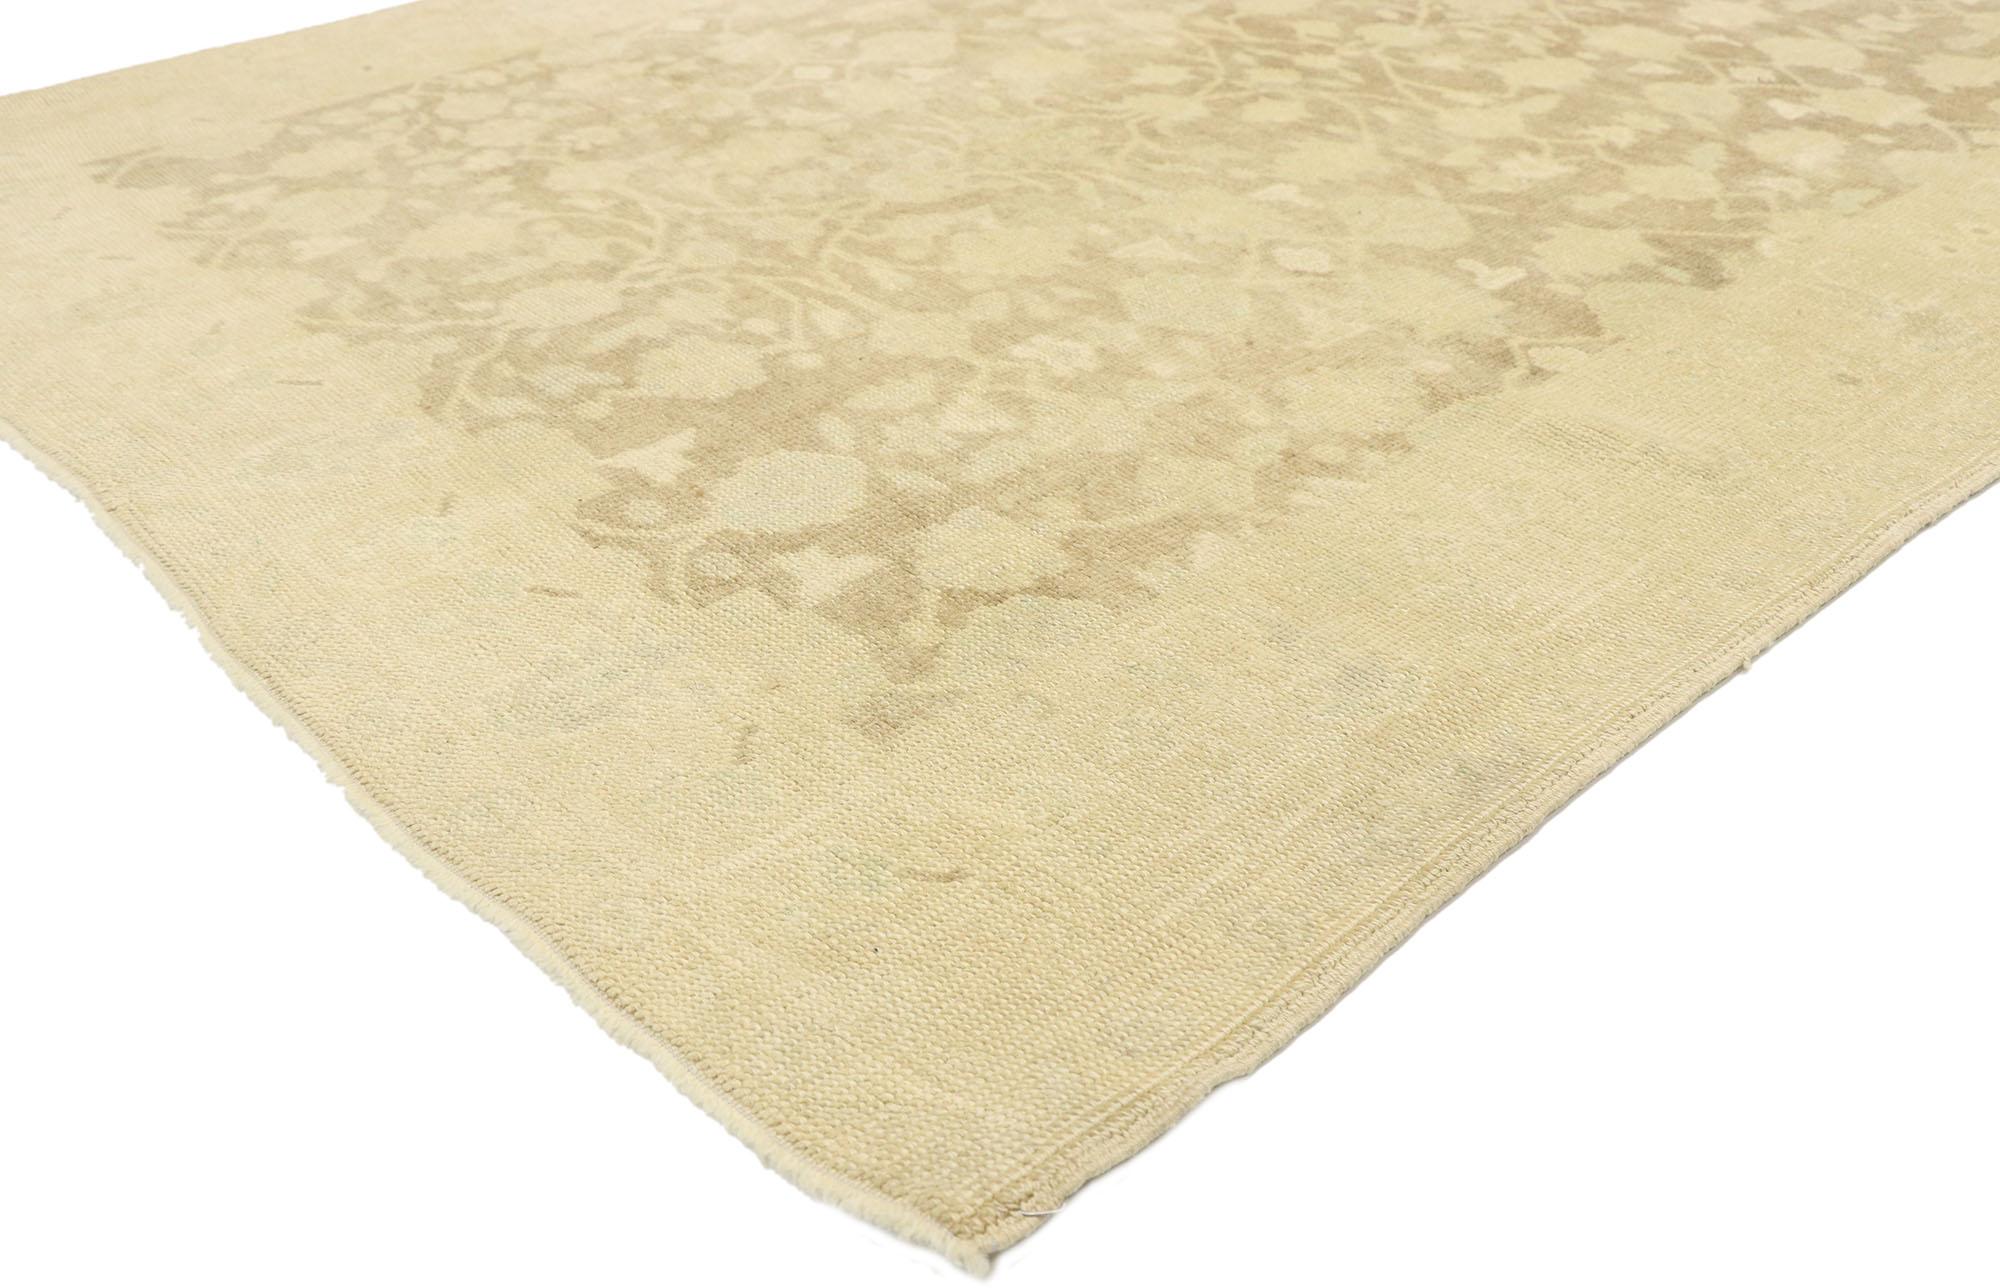 53018, vintage Turkish Oushak rug with monochromatic mission style. Emanating sophistication and grace, this hand knotted wool vintage Turkish Oushak rug provides an elegant and genteel design aesthetic with soft subtle hues. The abrashed antique